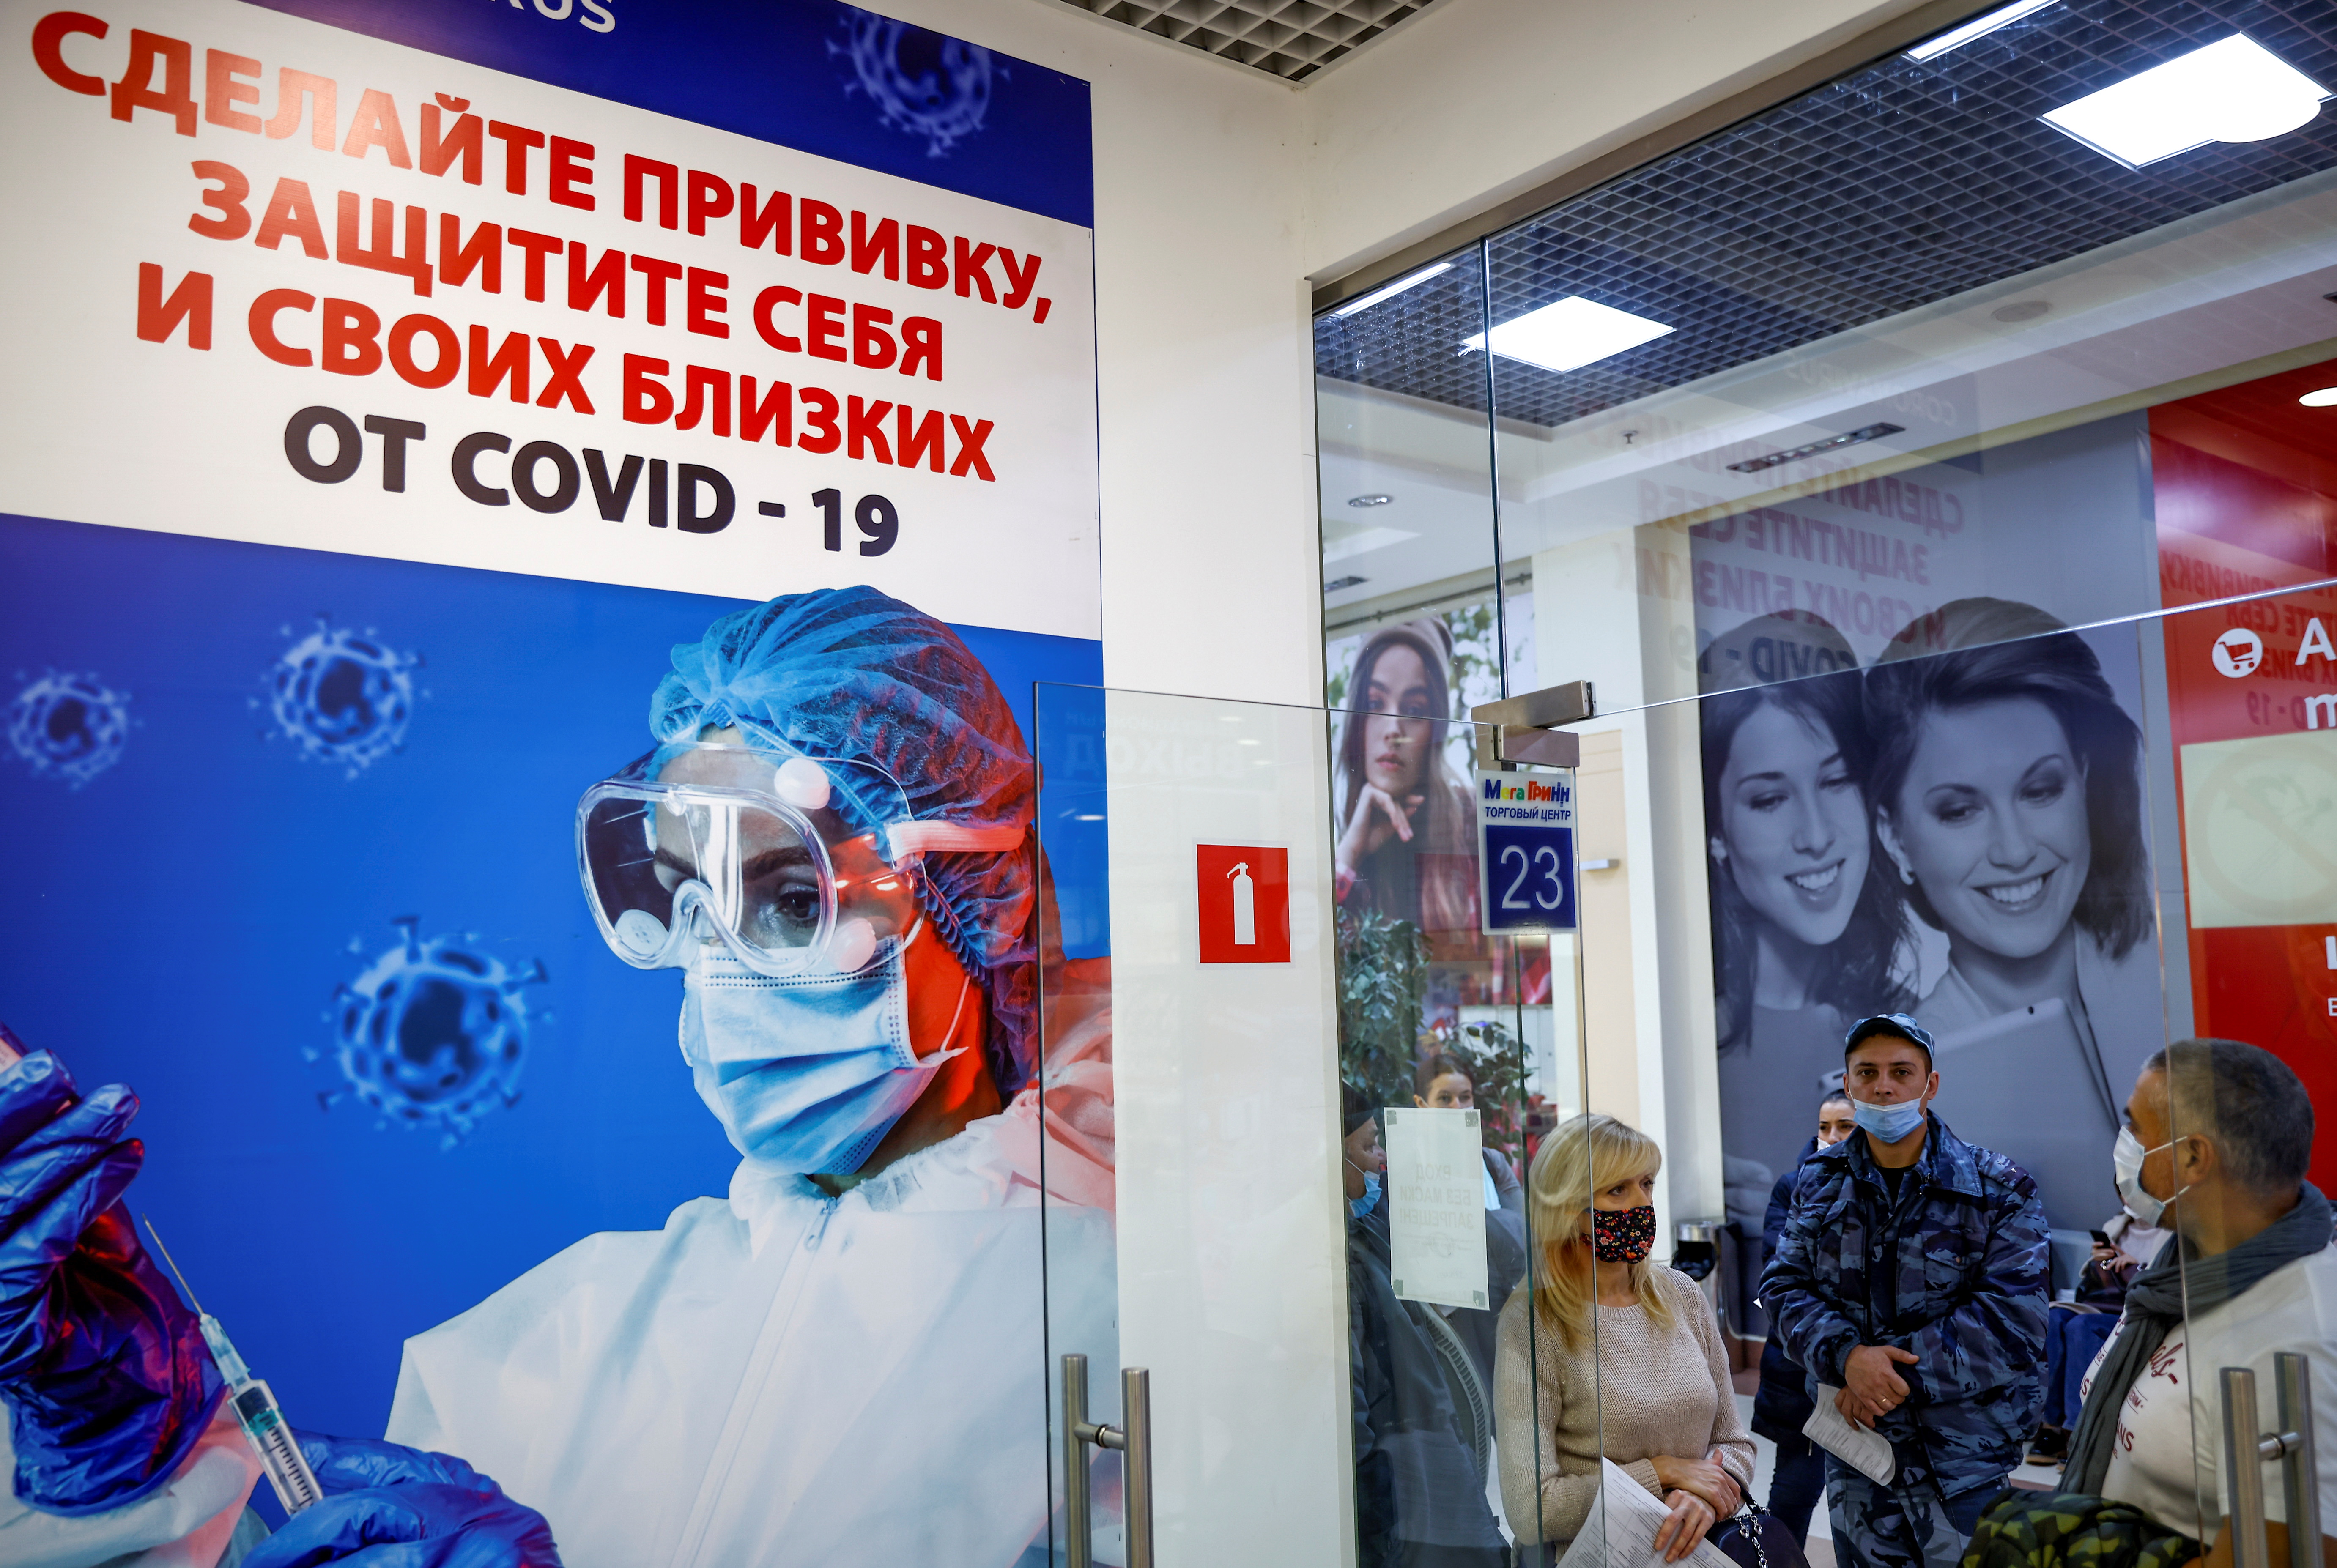 People stand in a line to receive a vaccine against the coronavirus disease in Oryol